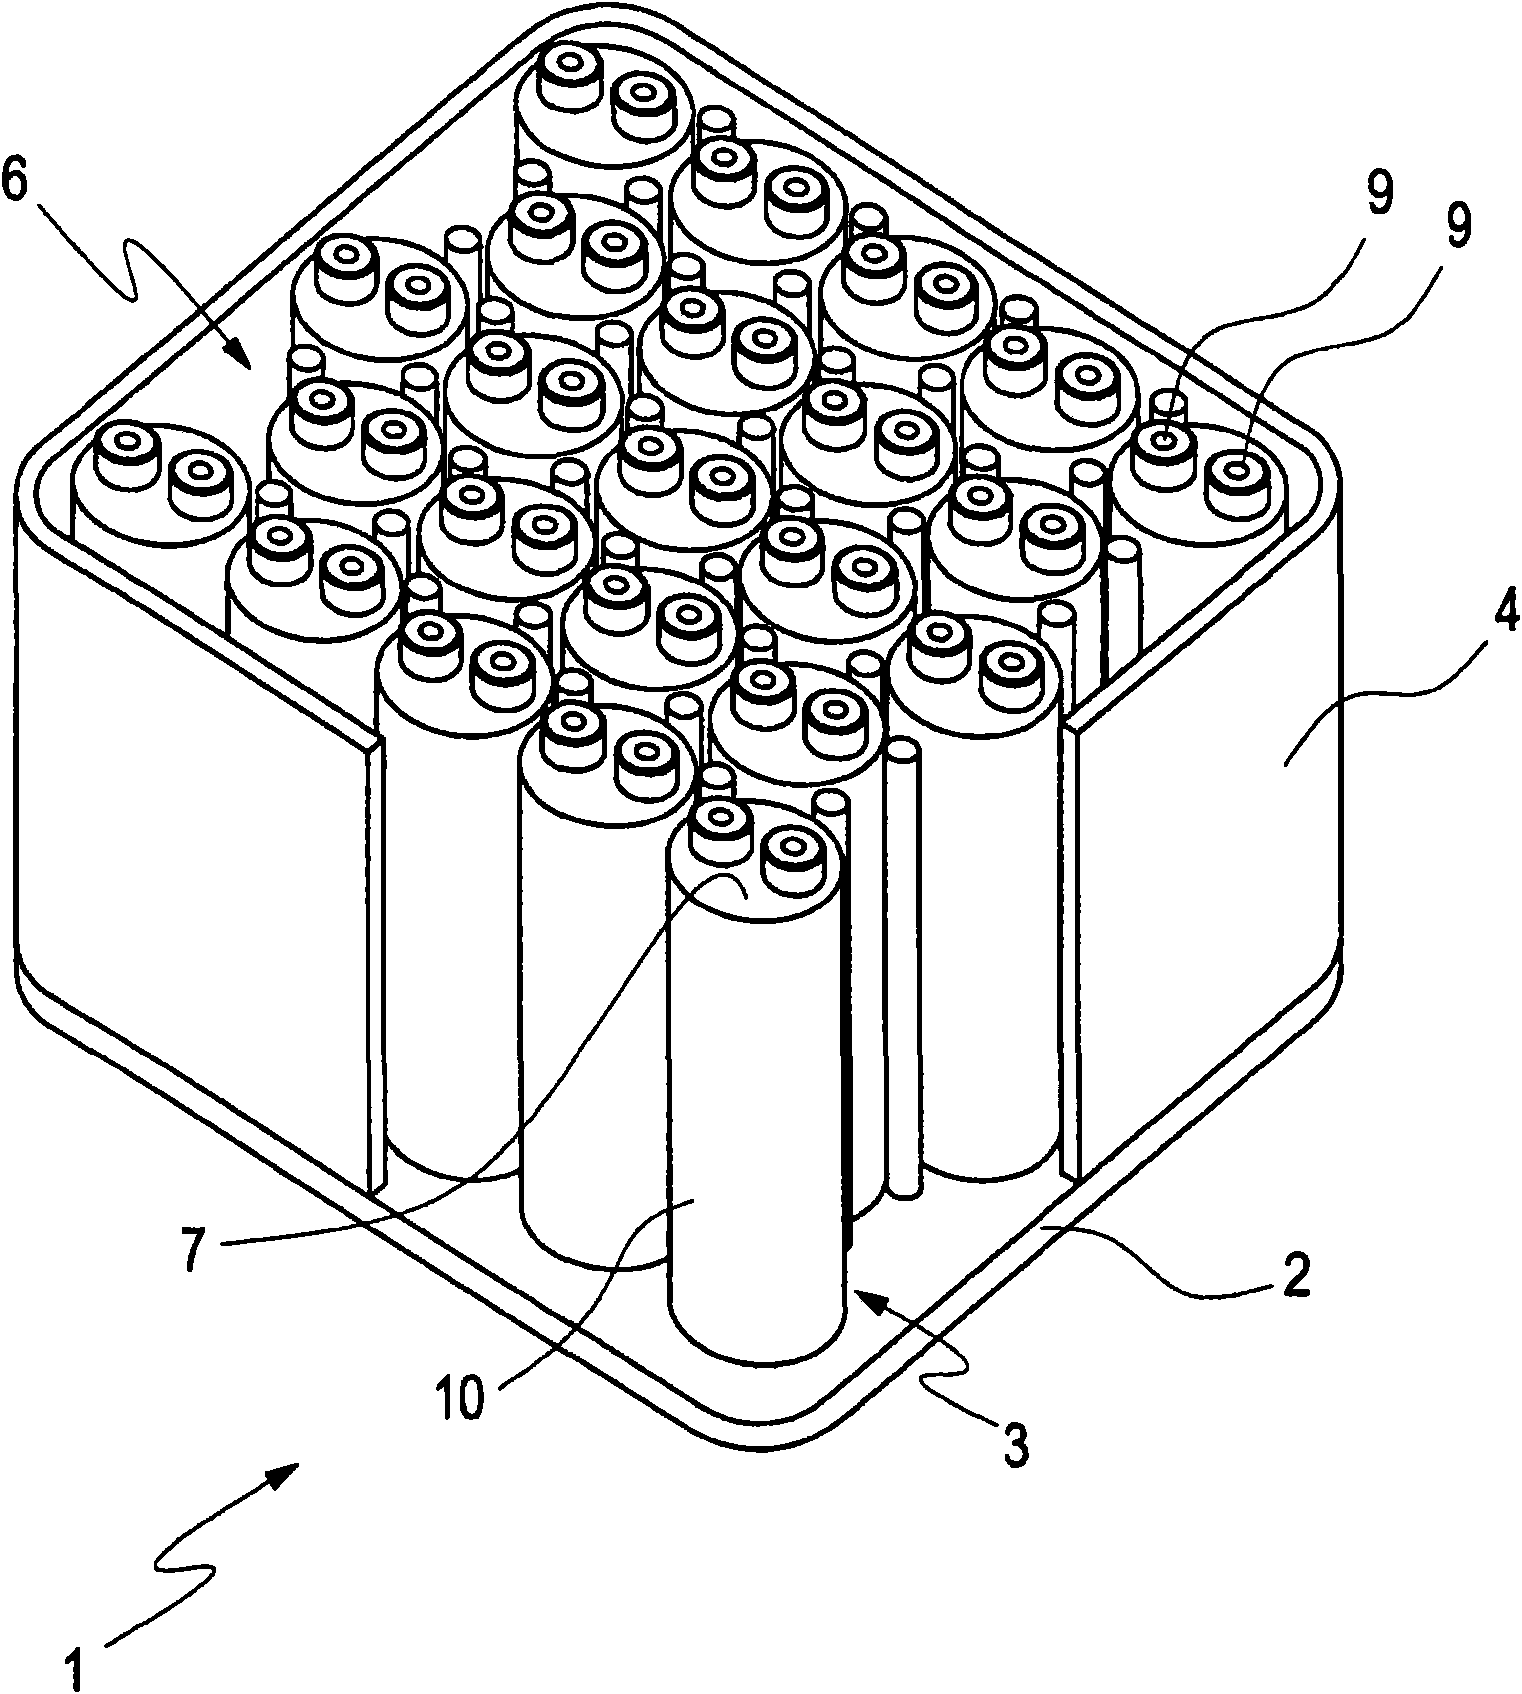 Battery with a heat conducting plate